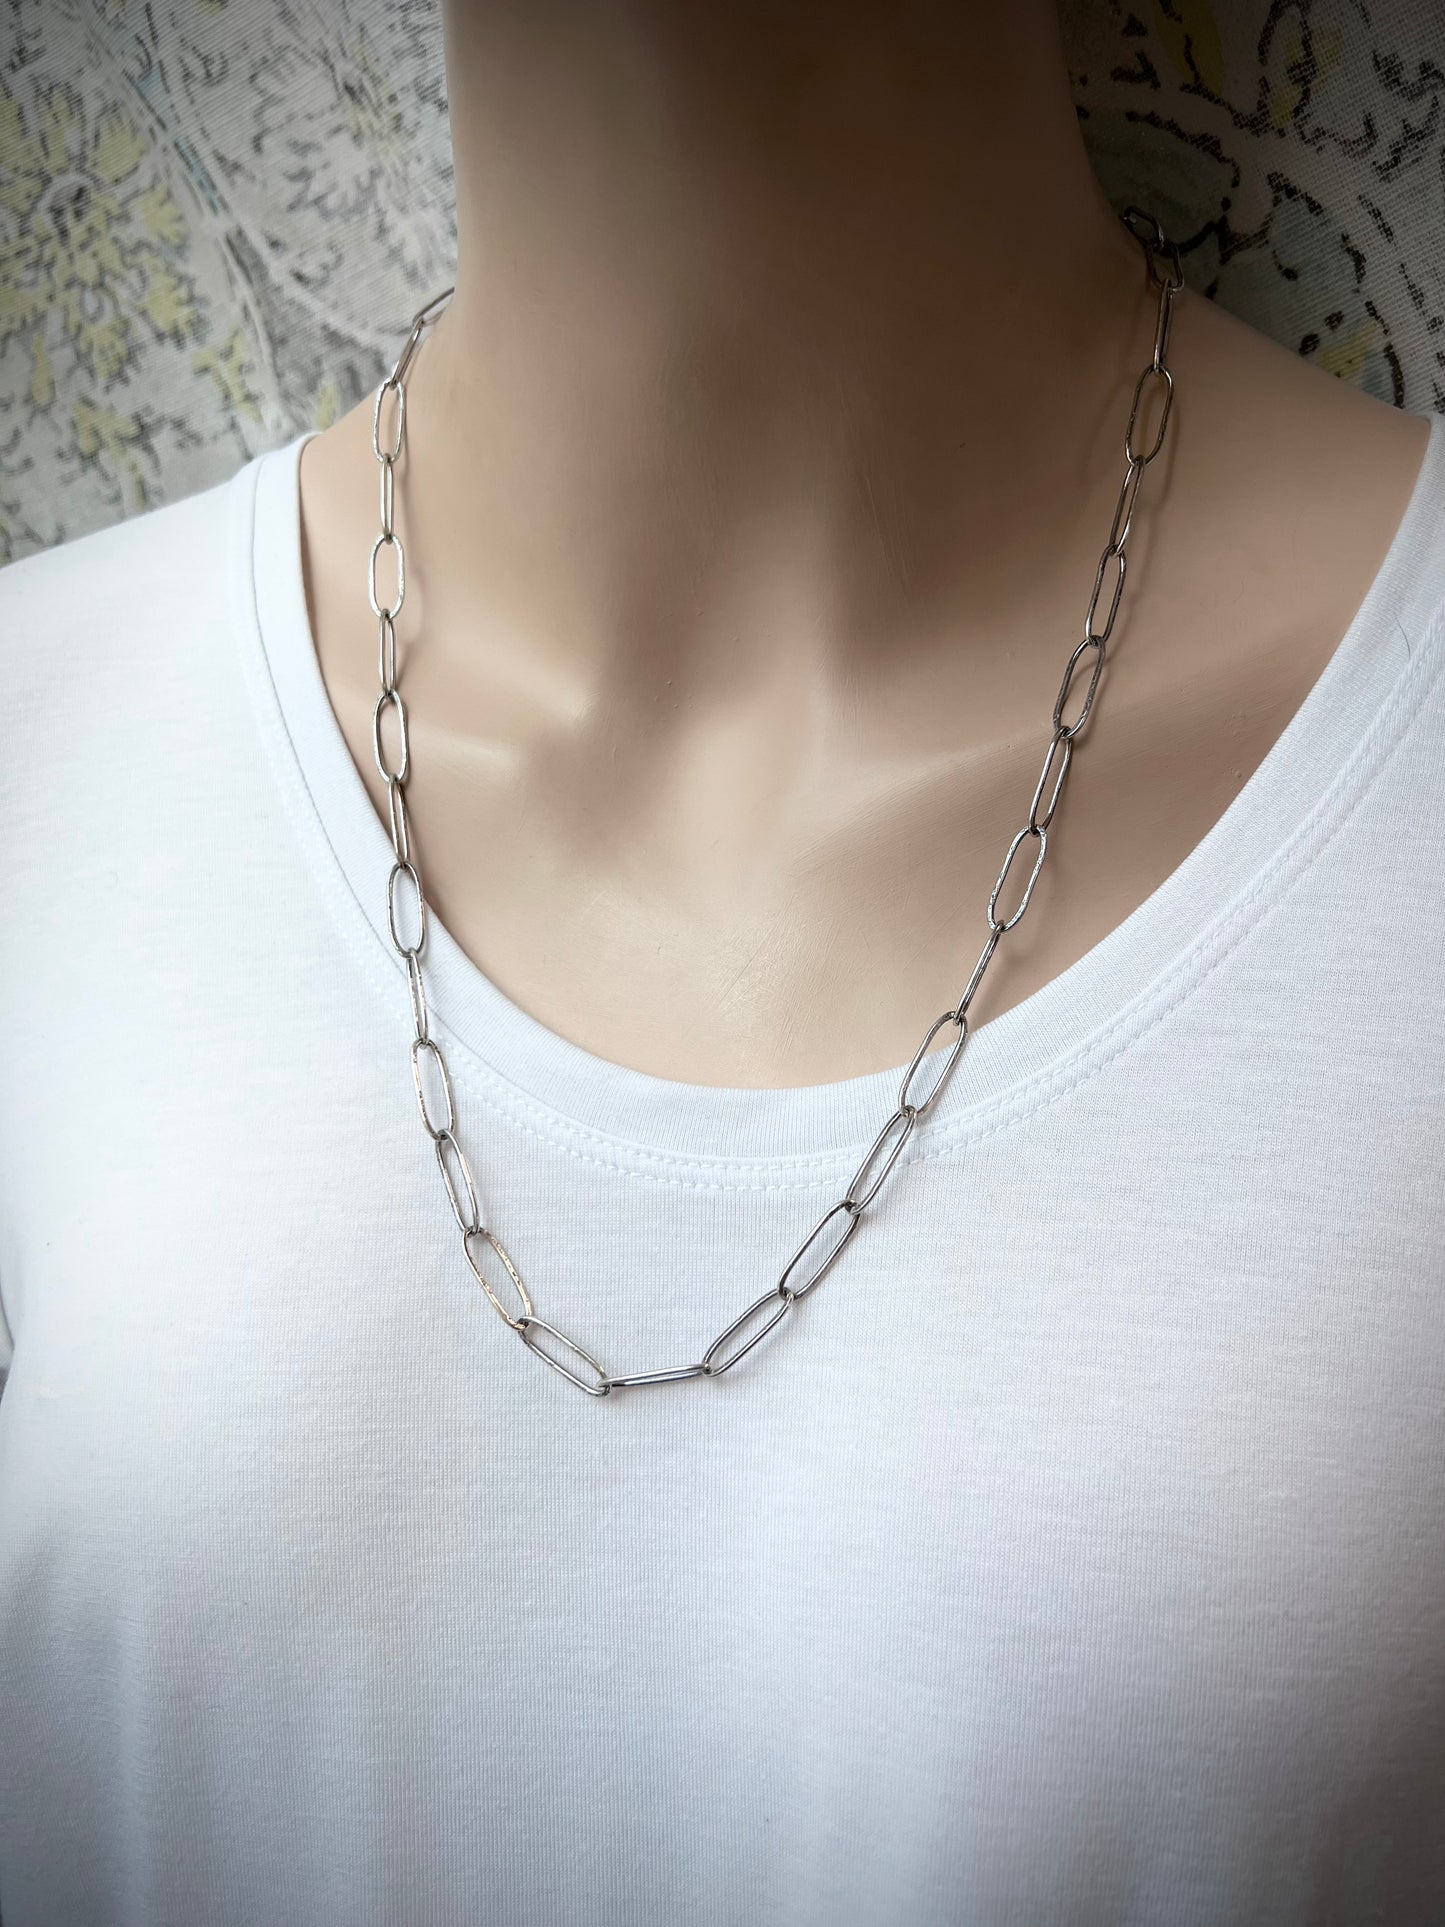 Sterling Silver Handmade Elongated Cable Chain with Handmade Hook Clasp